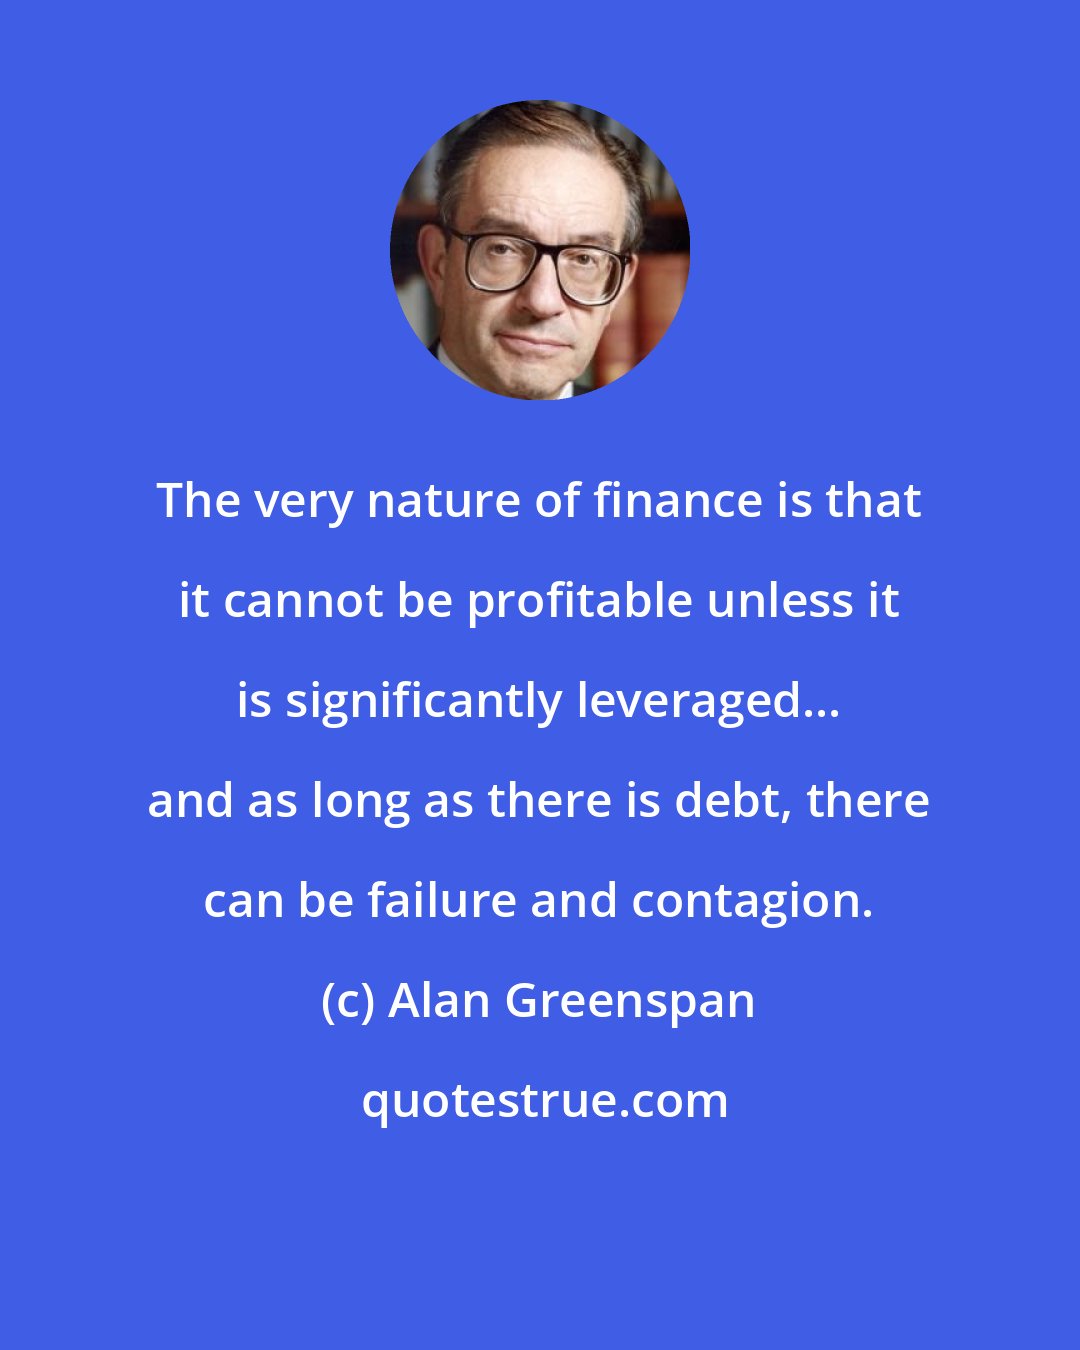 Alan Greenspan: The very nature of finance is that it cannot be profitable unless it is significantly leveraged... and as long as there is debt, there can be failure and contagion.